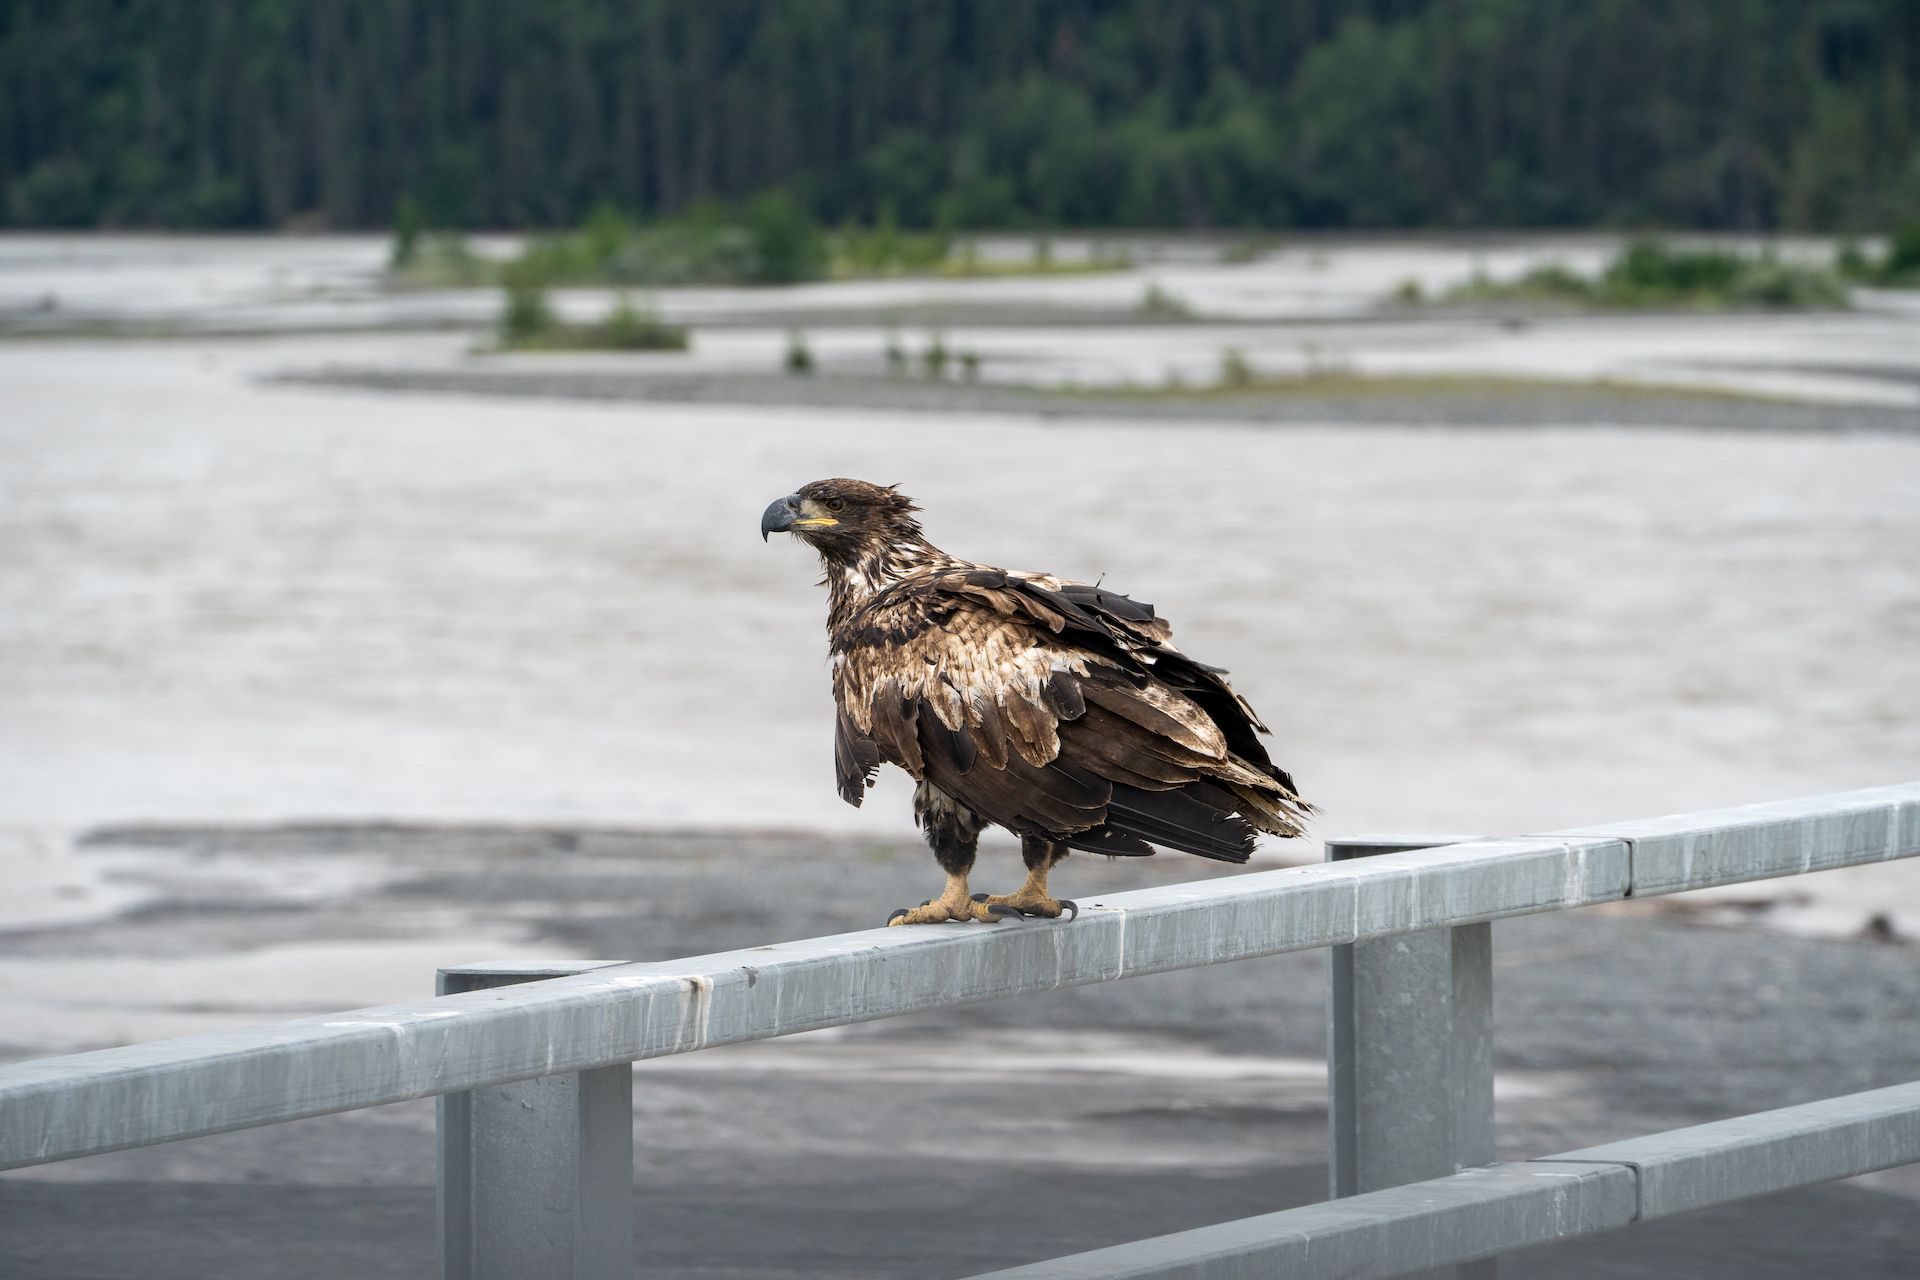 We were so surprised to see a golden eagle up close on the bridge crossing the Chitina River.